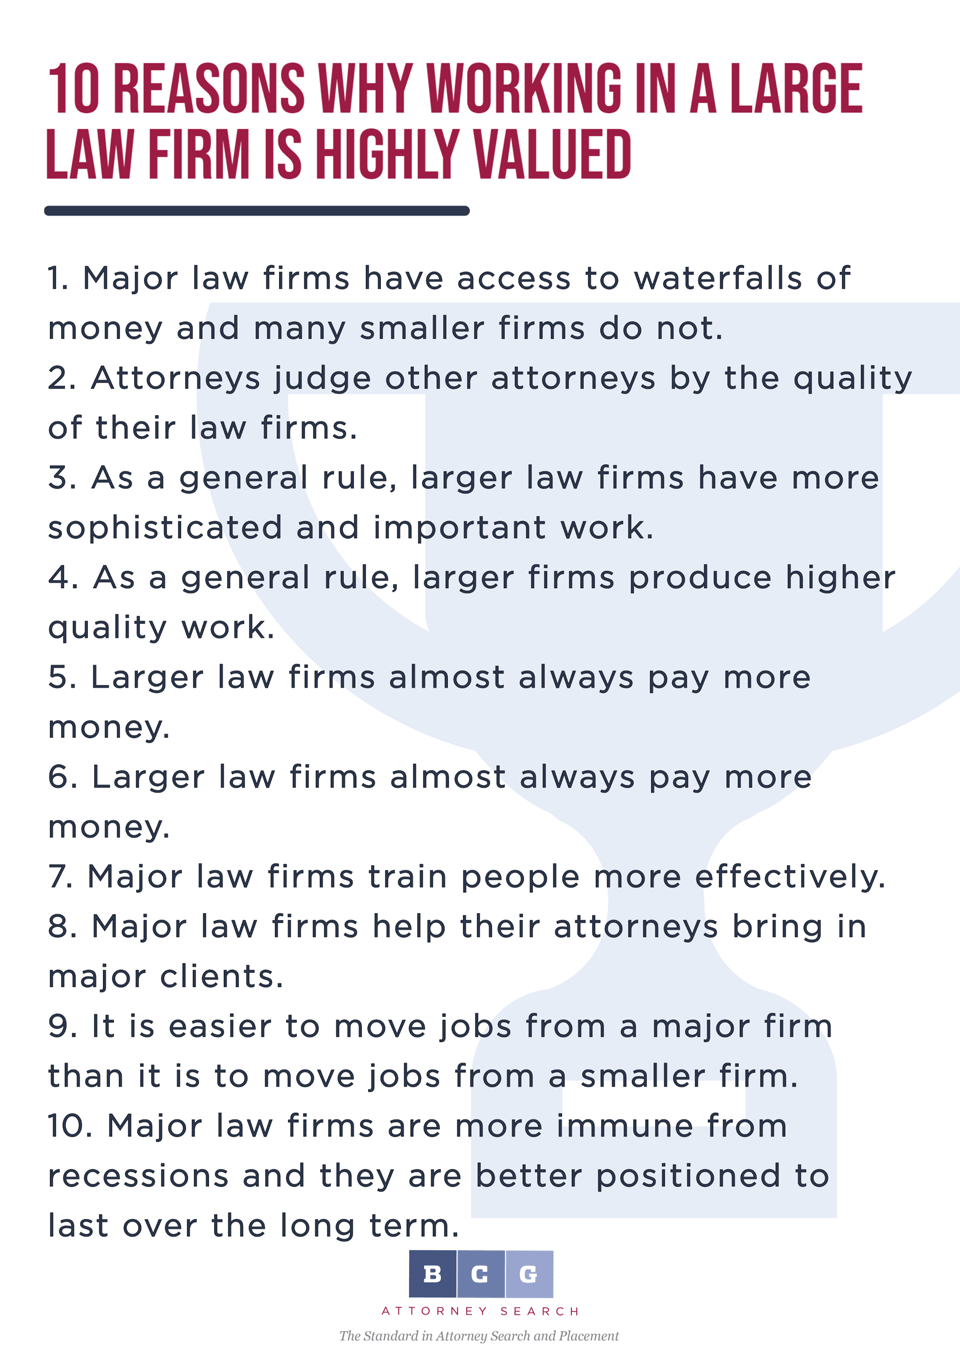 Top Law Firms